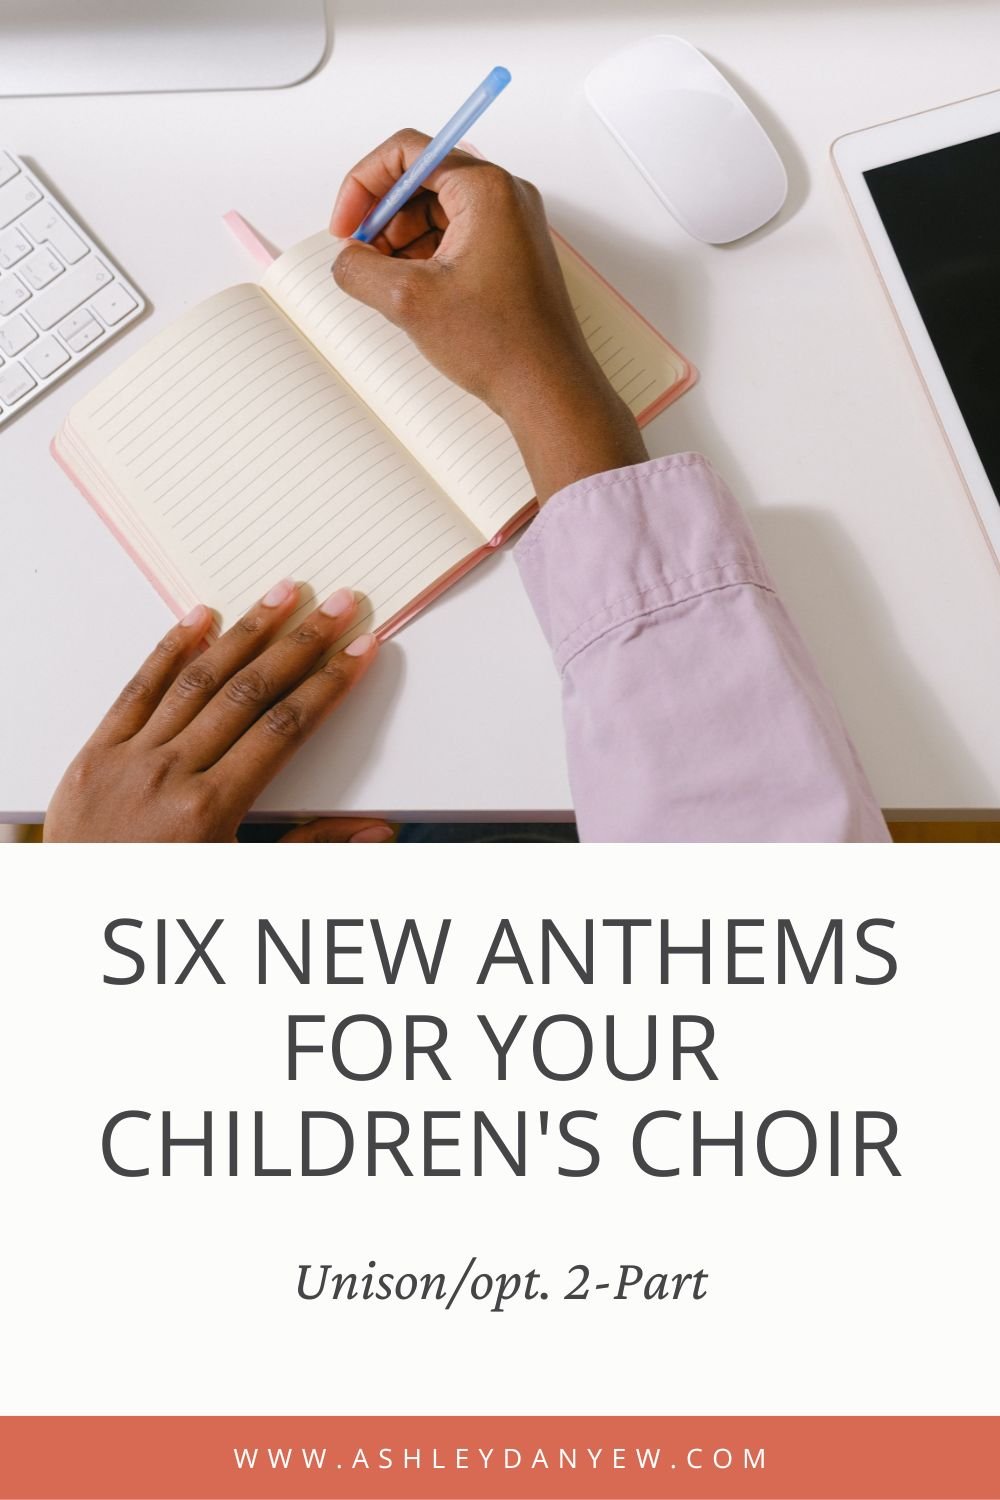 Six New Anthems for Your Children's Choir